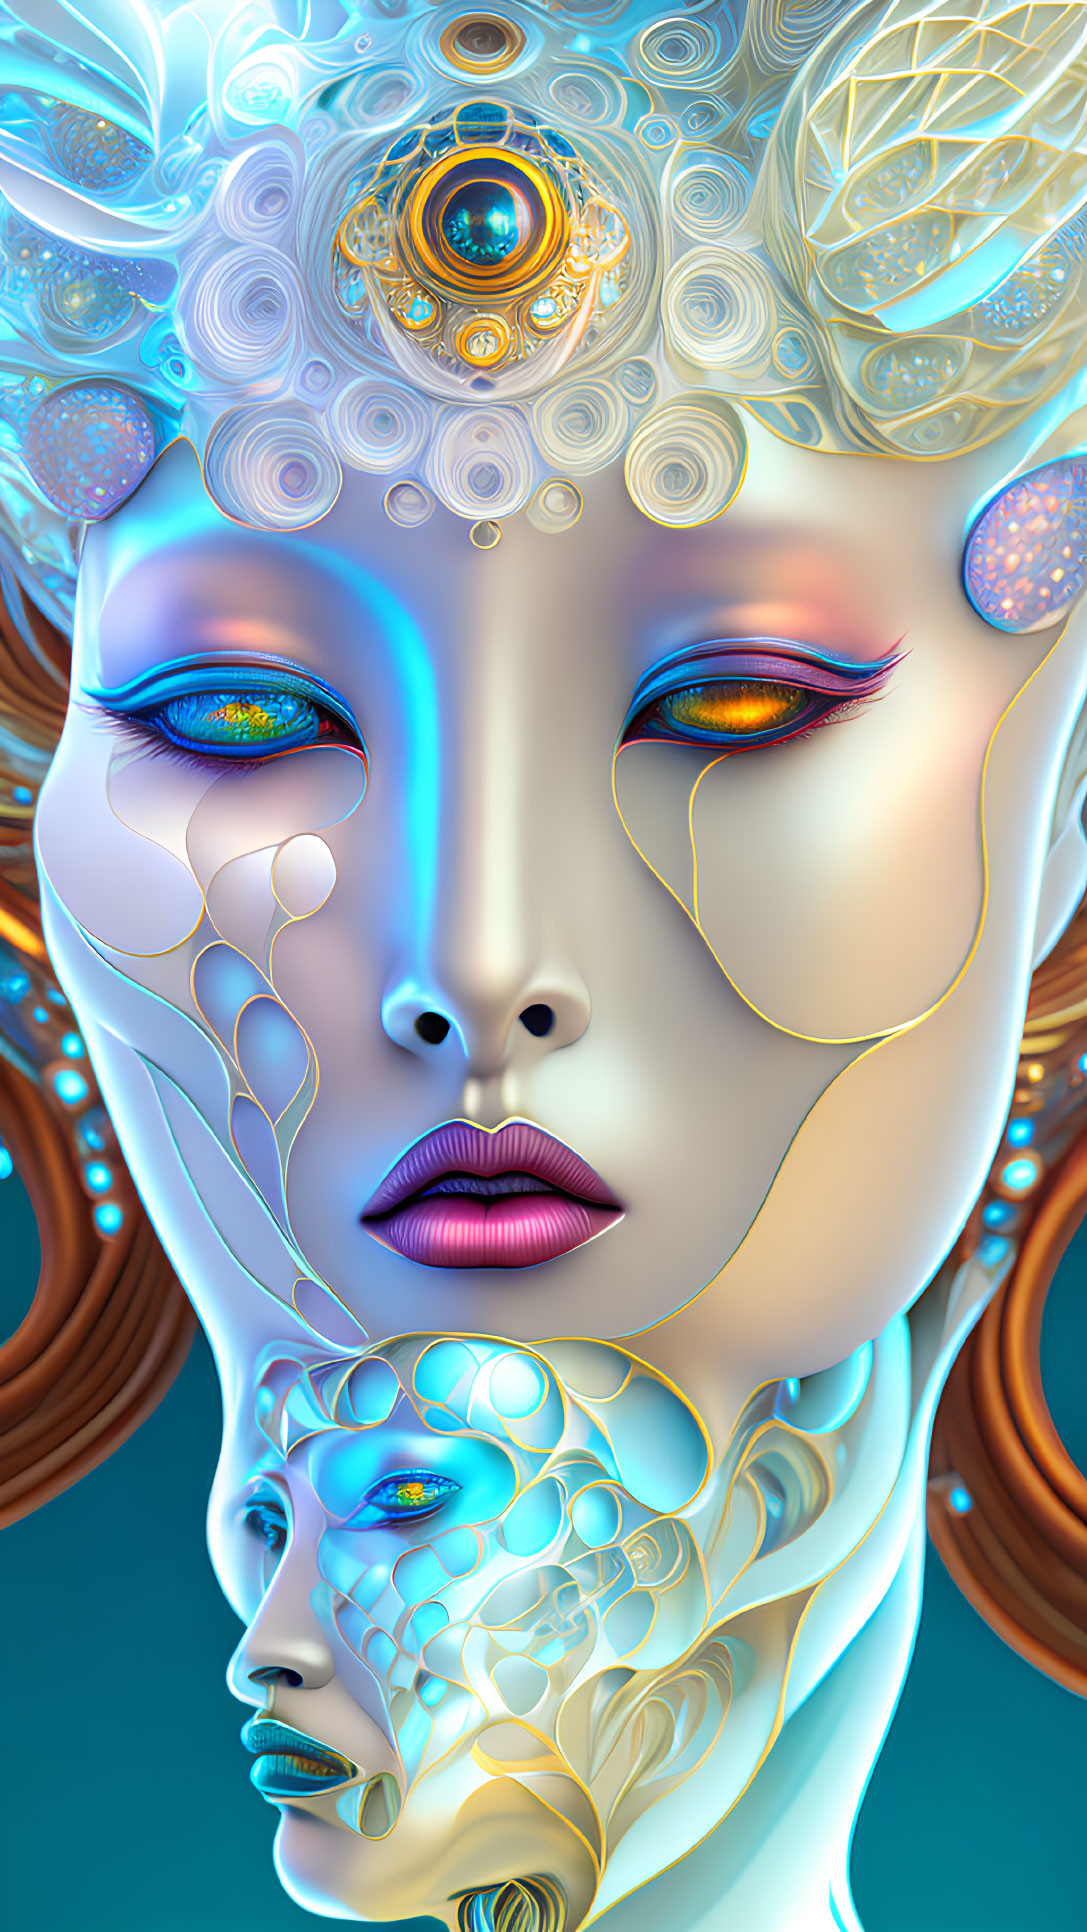 Futuristic digital artwork: Stylized female faces with intricate blue and gold patterns